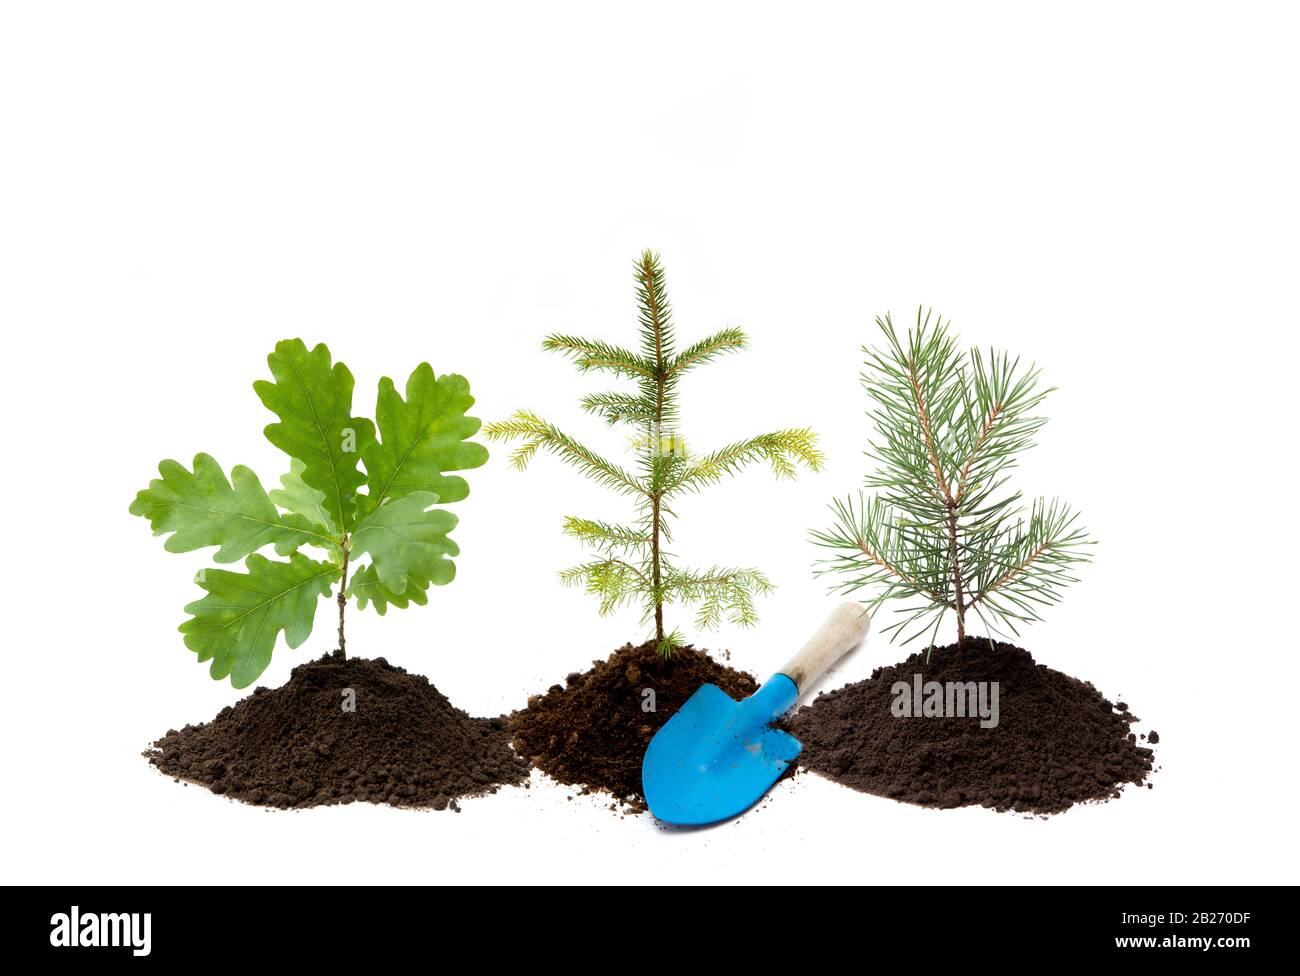 Reforestation background. Different small trees oak, spruce and pine tree in a pile of dirt with small gardening shovel, isolated on white background. Stock Photo